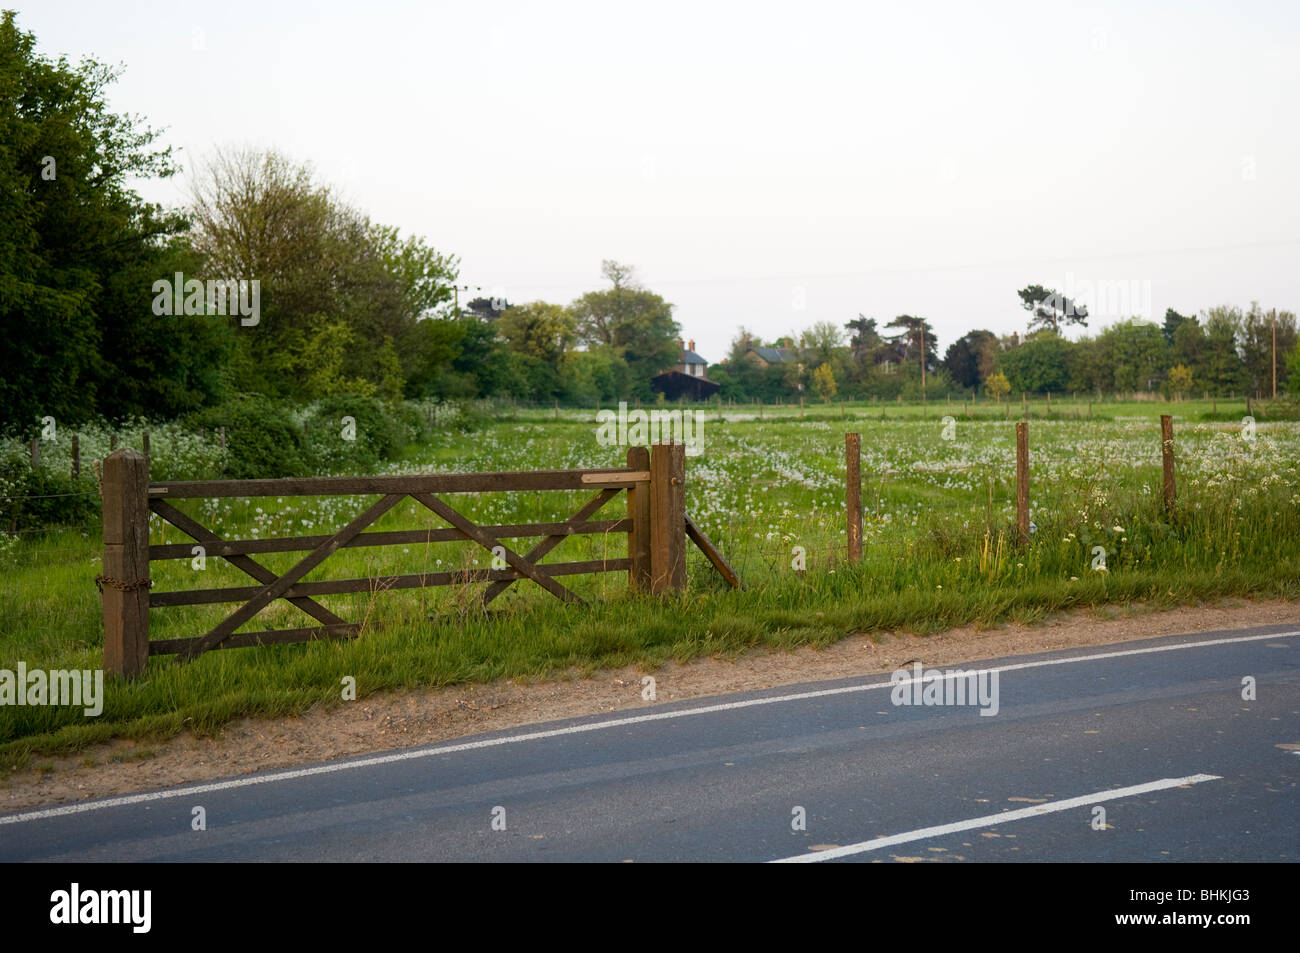 Five bar gate in a field full of dandelion clocks on the outskirts of Ramsgate, Kent, United Kingdom Stock Photo